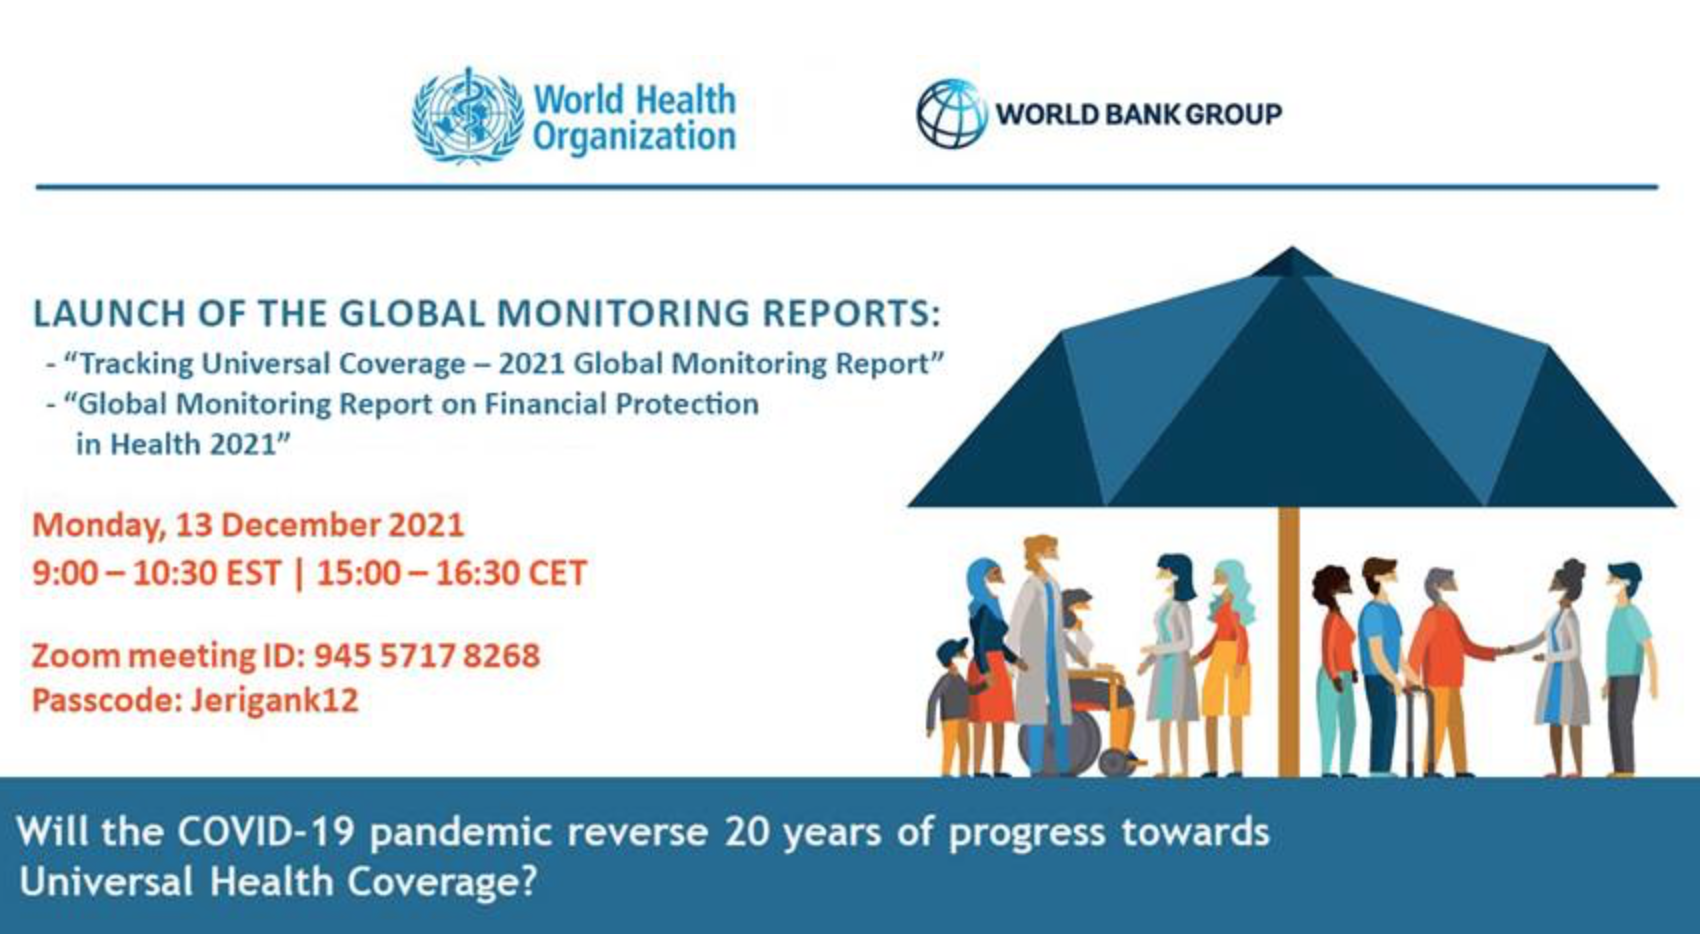 Launch of the global monitoring reports “Tracking Universal Coverage – 2021 Global Monitoring Report” and “Global Monitoring Report on Financial Protection in Health 2021”